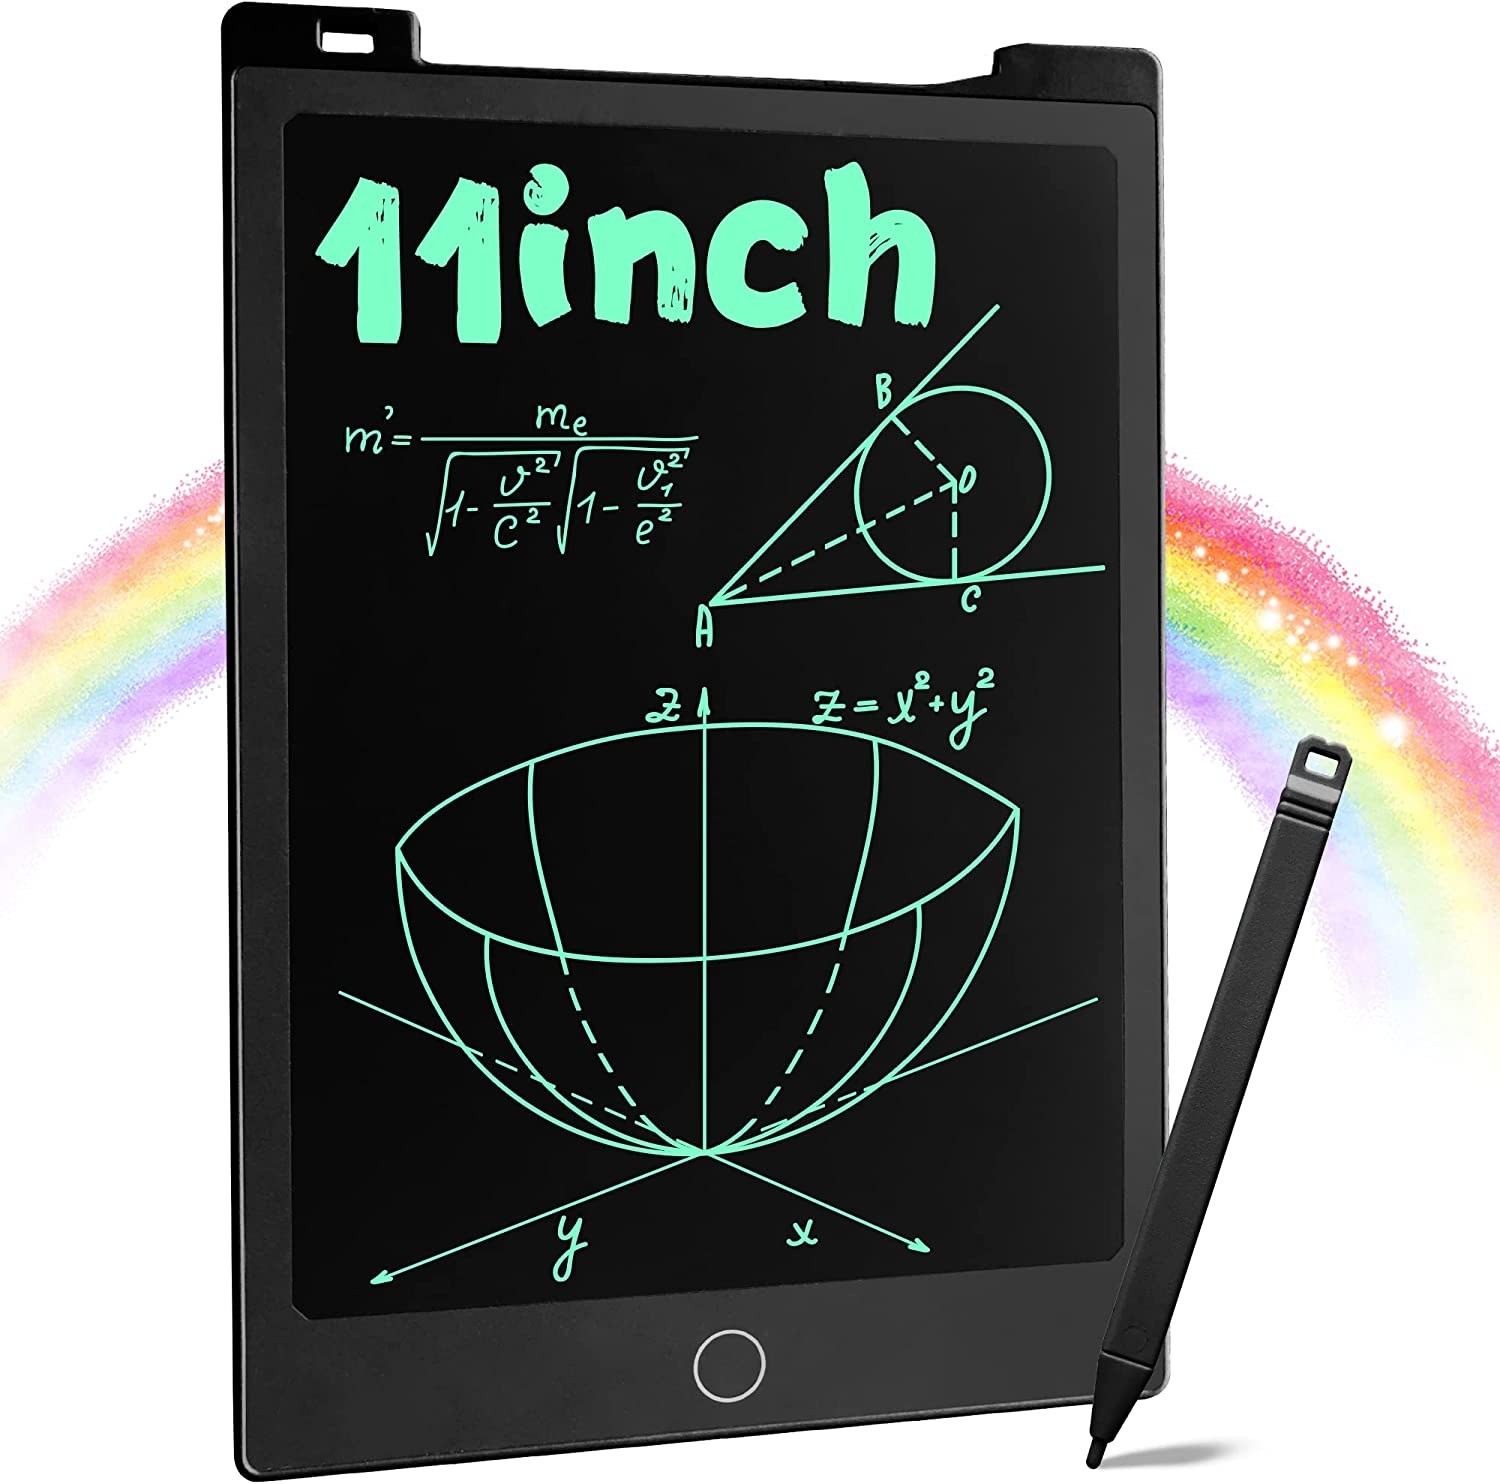 Richgv 11 inch LCD Writing Tablet with Magnets, Business Style Graphic  Tablet, Writing & Drawing Board for Toddlers, Kids, Adults, LCD Digital  Writing